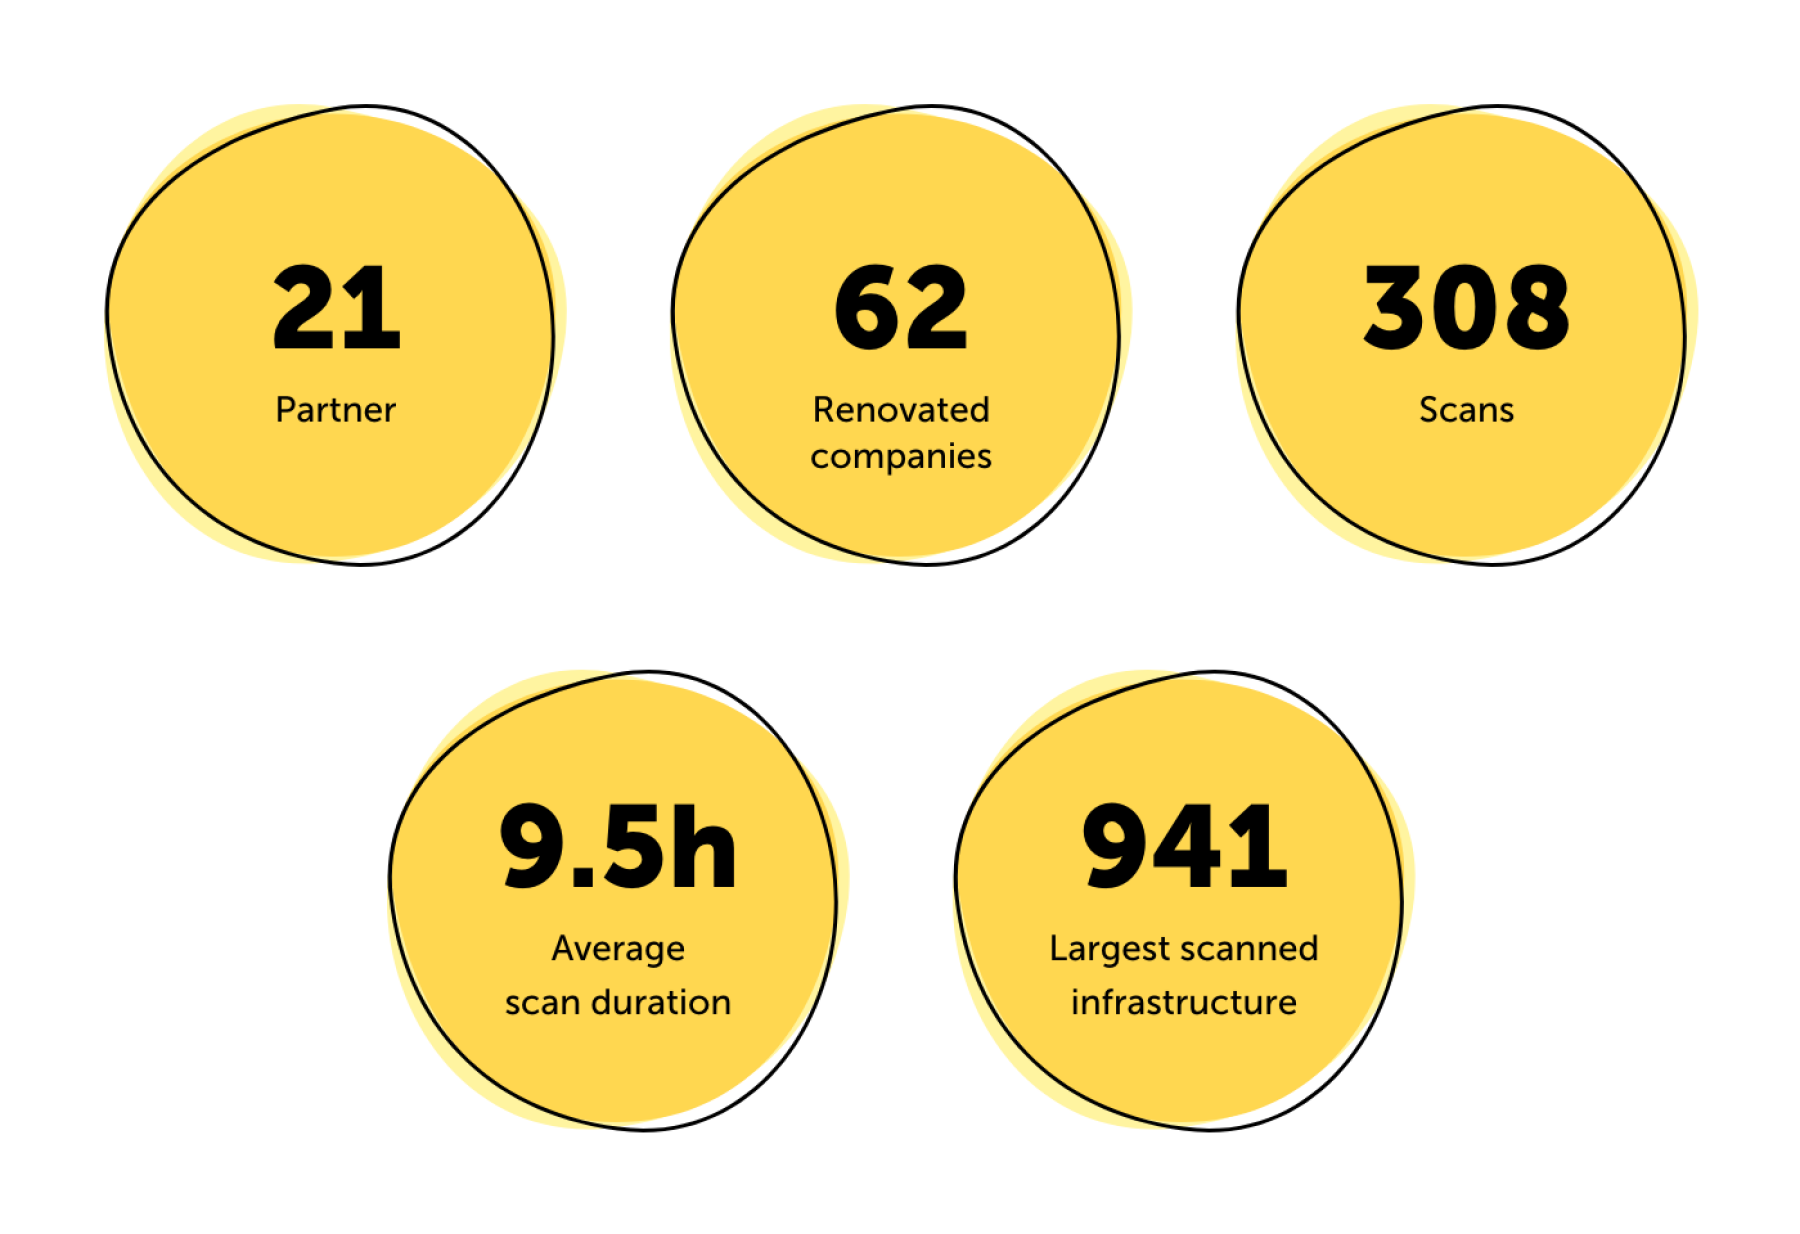 Lywand acquired 21 partners who performed 308 scans in 2021. In sum, the IT security of 62 companies has been renovated. The average scan duration was 9.5 hours, and the largest infrastructure scanned was 941 targets.